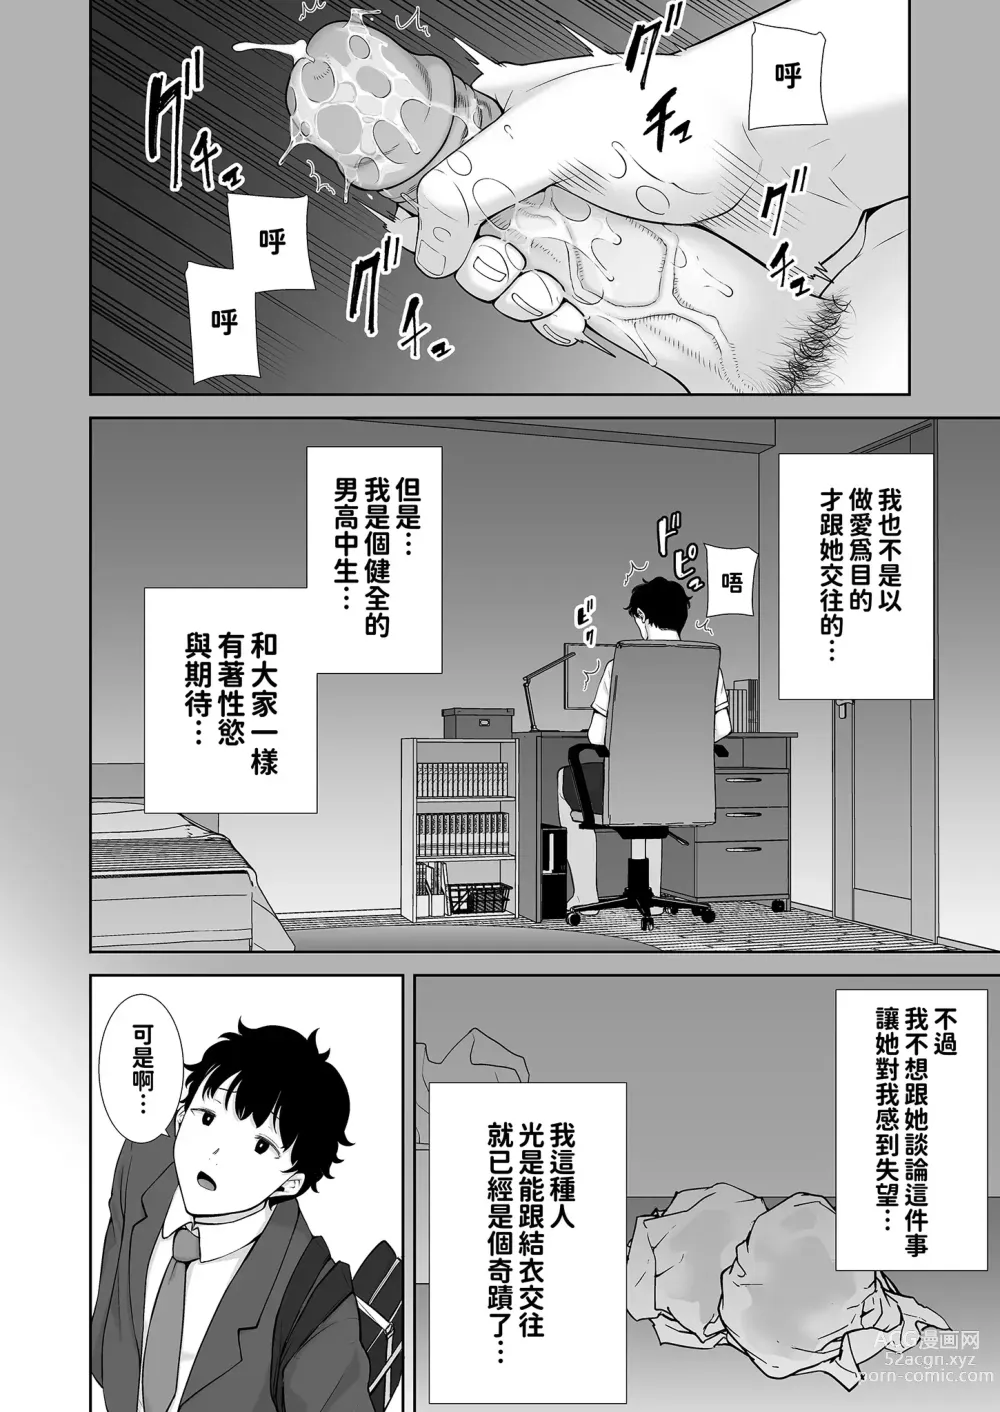 Page 9 of doujinshi KanoMama Syndrome 1 glass ver